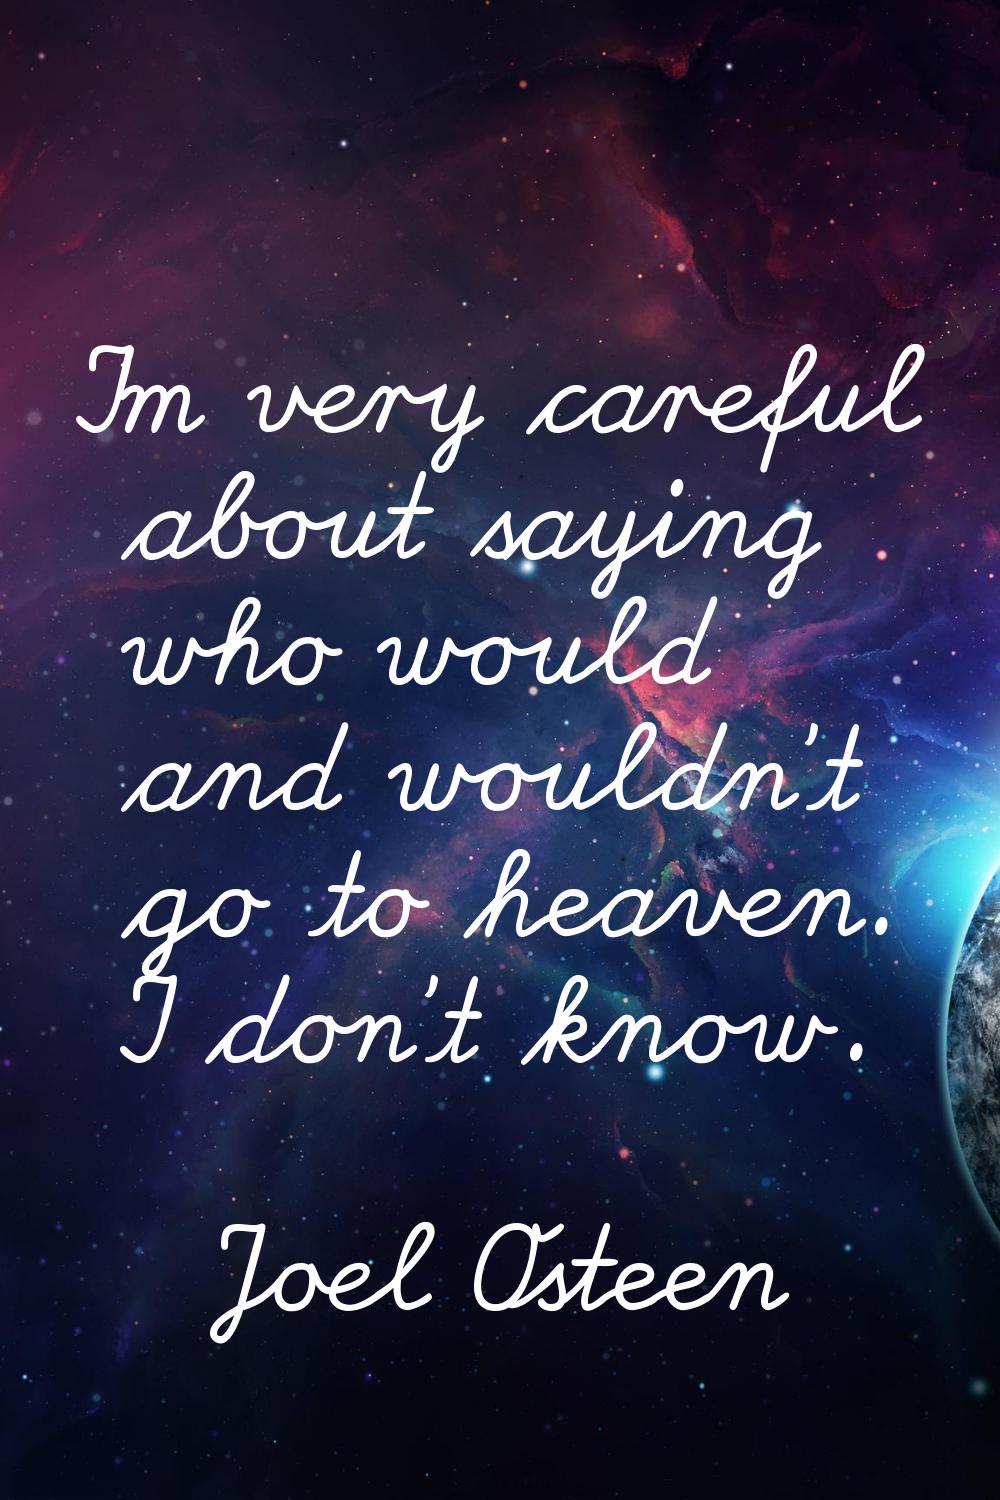 I'm very careful about saying who would and wouldn't go to heaven. I don't know.